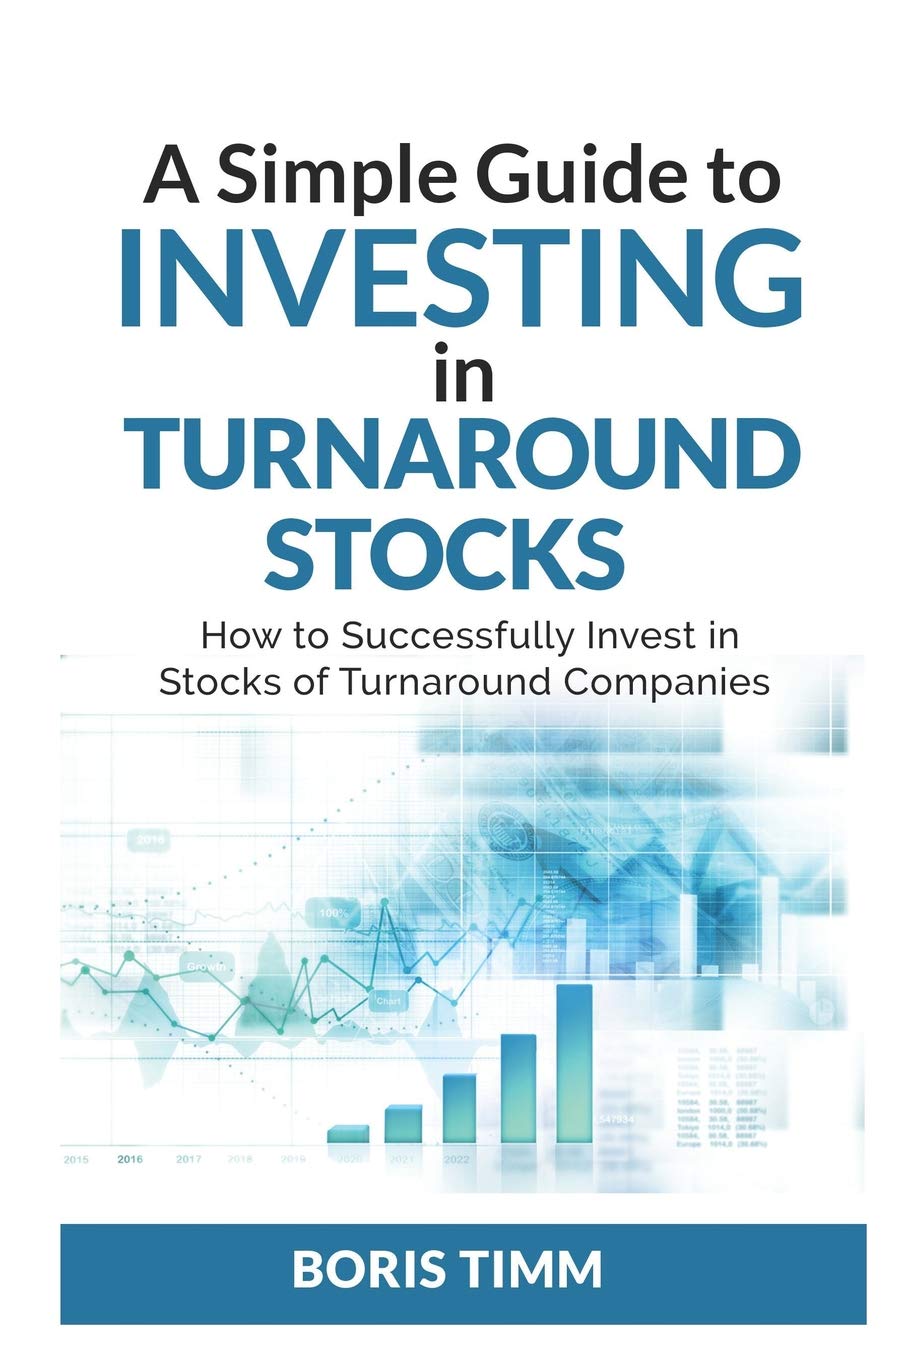 A Simple Guide to Investing in Turn around Stocks